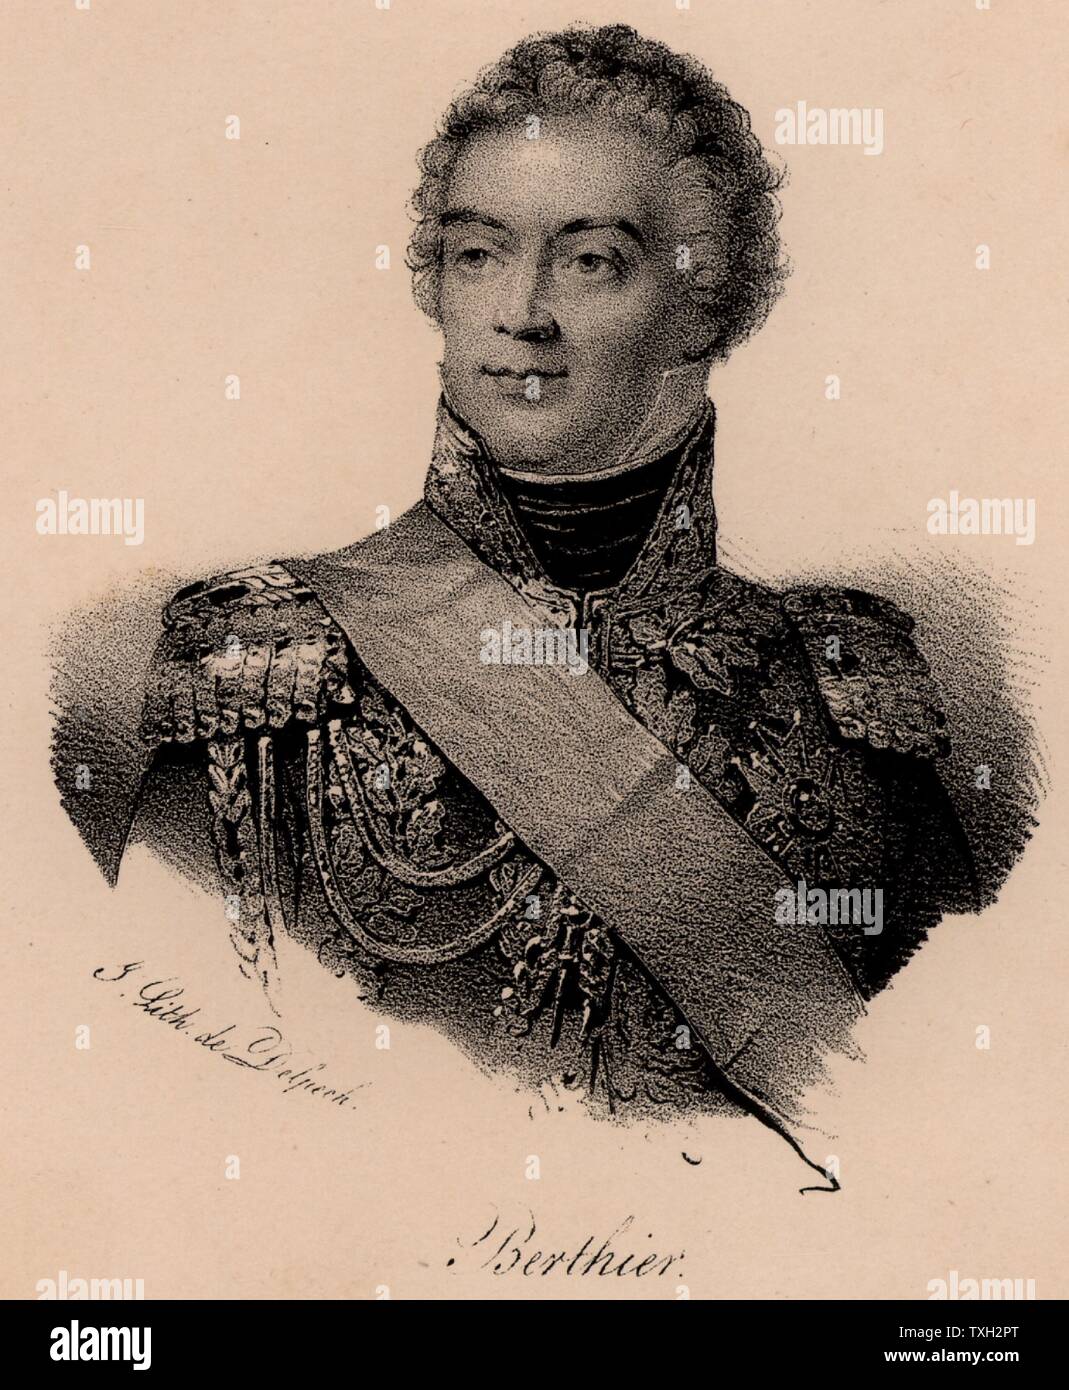 Alexandre Berthier (1753-1815). Prince of Neuchatel and Wagram. French soldier, Marshal of France. Chief of staff to Napoleon. Fought with Lafayette during the American War of Independence.  Lithograph. Stock Photo